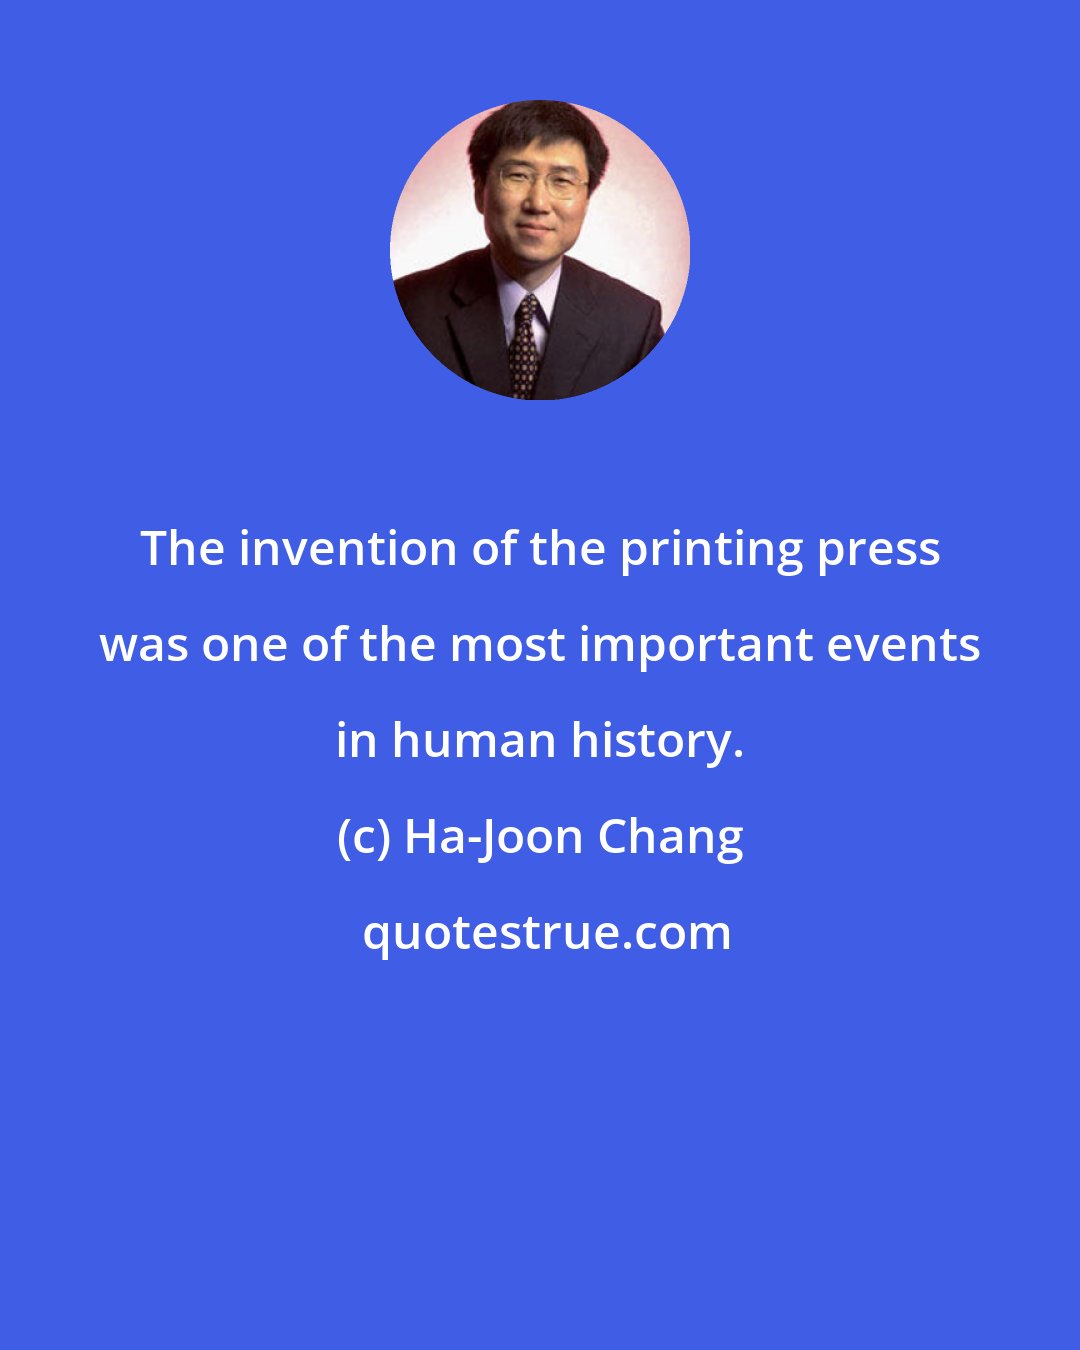 Ha-Joon Chang: The invention of the printing press was one of the most important events in human history.